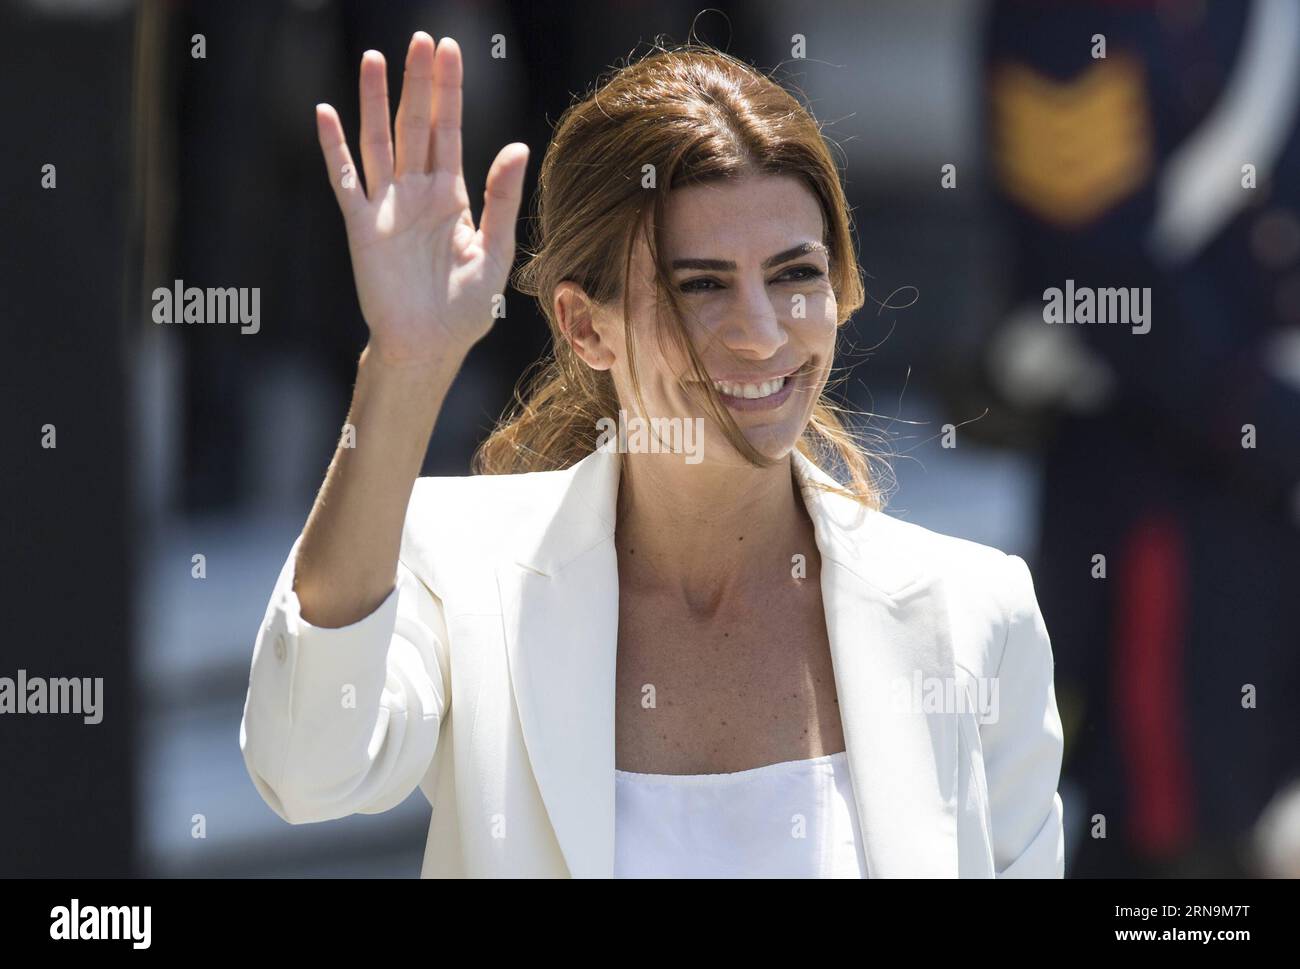 (151211) -- BUENOS AIRES, Dec. 11, 2015 -- Argentina s First Lady Juliana Awada waves before participate in the Tedeum at the Metropolitan Cathedral in Buenos Aires, capital of Argentina, Dec. 11, 2015. According to local press, Argetina s President Mauricio Macri Friday attended the traditional religious service at the Metropolital Cathedral, the day after his pesidential inauguration. Martin Zabala) (jg) (fnc) ARGENTINA-BUENOS AIRES-POLITICS-PRESIDENT e MARTINxZABALA PUBLICATIONxNOTxINxCHN   151211 Buenos Aires DEC 11 2015 Argentina S First Lady Juliana Awada Waves Before participate in The Stock Photo